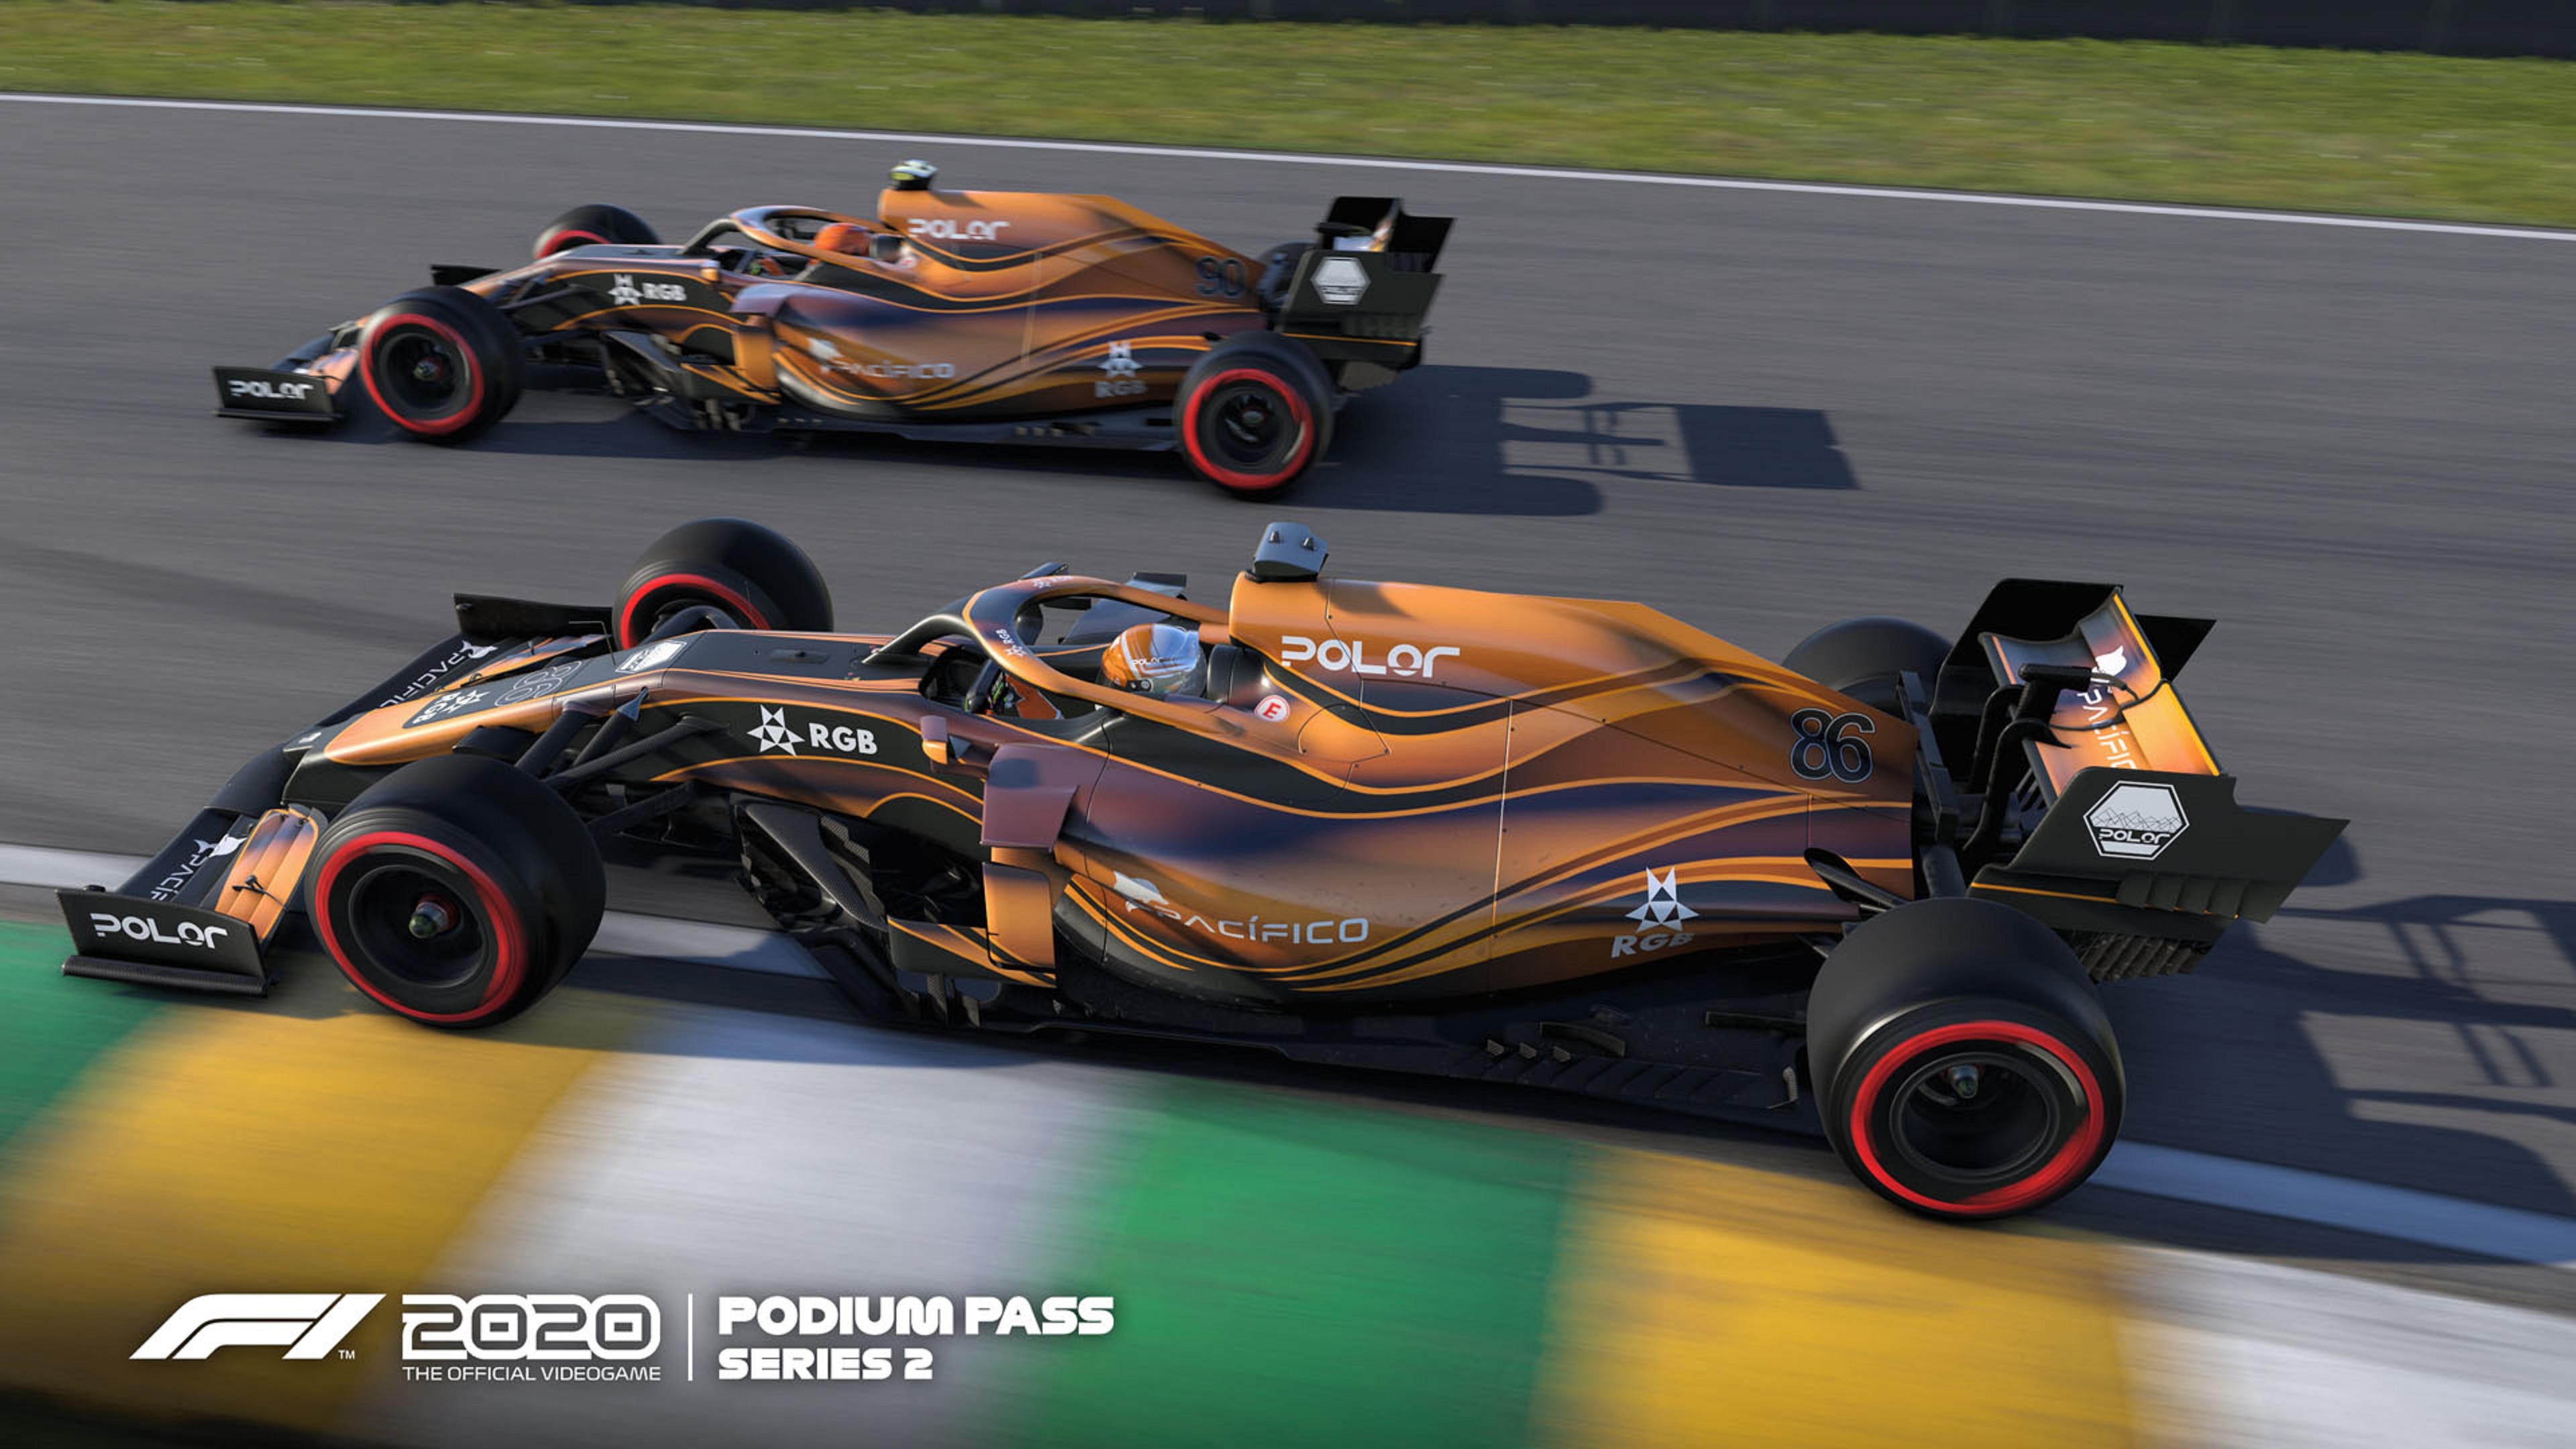 Get 50% off F1 2020 for PS4 Dec 22 • PSprices USA